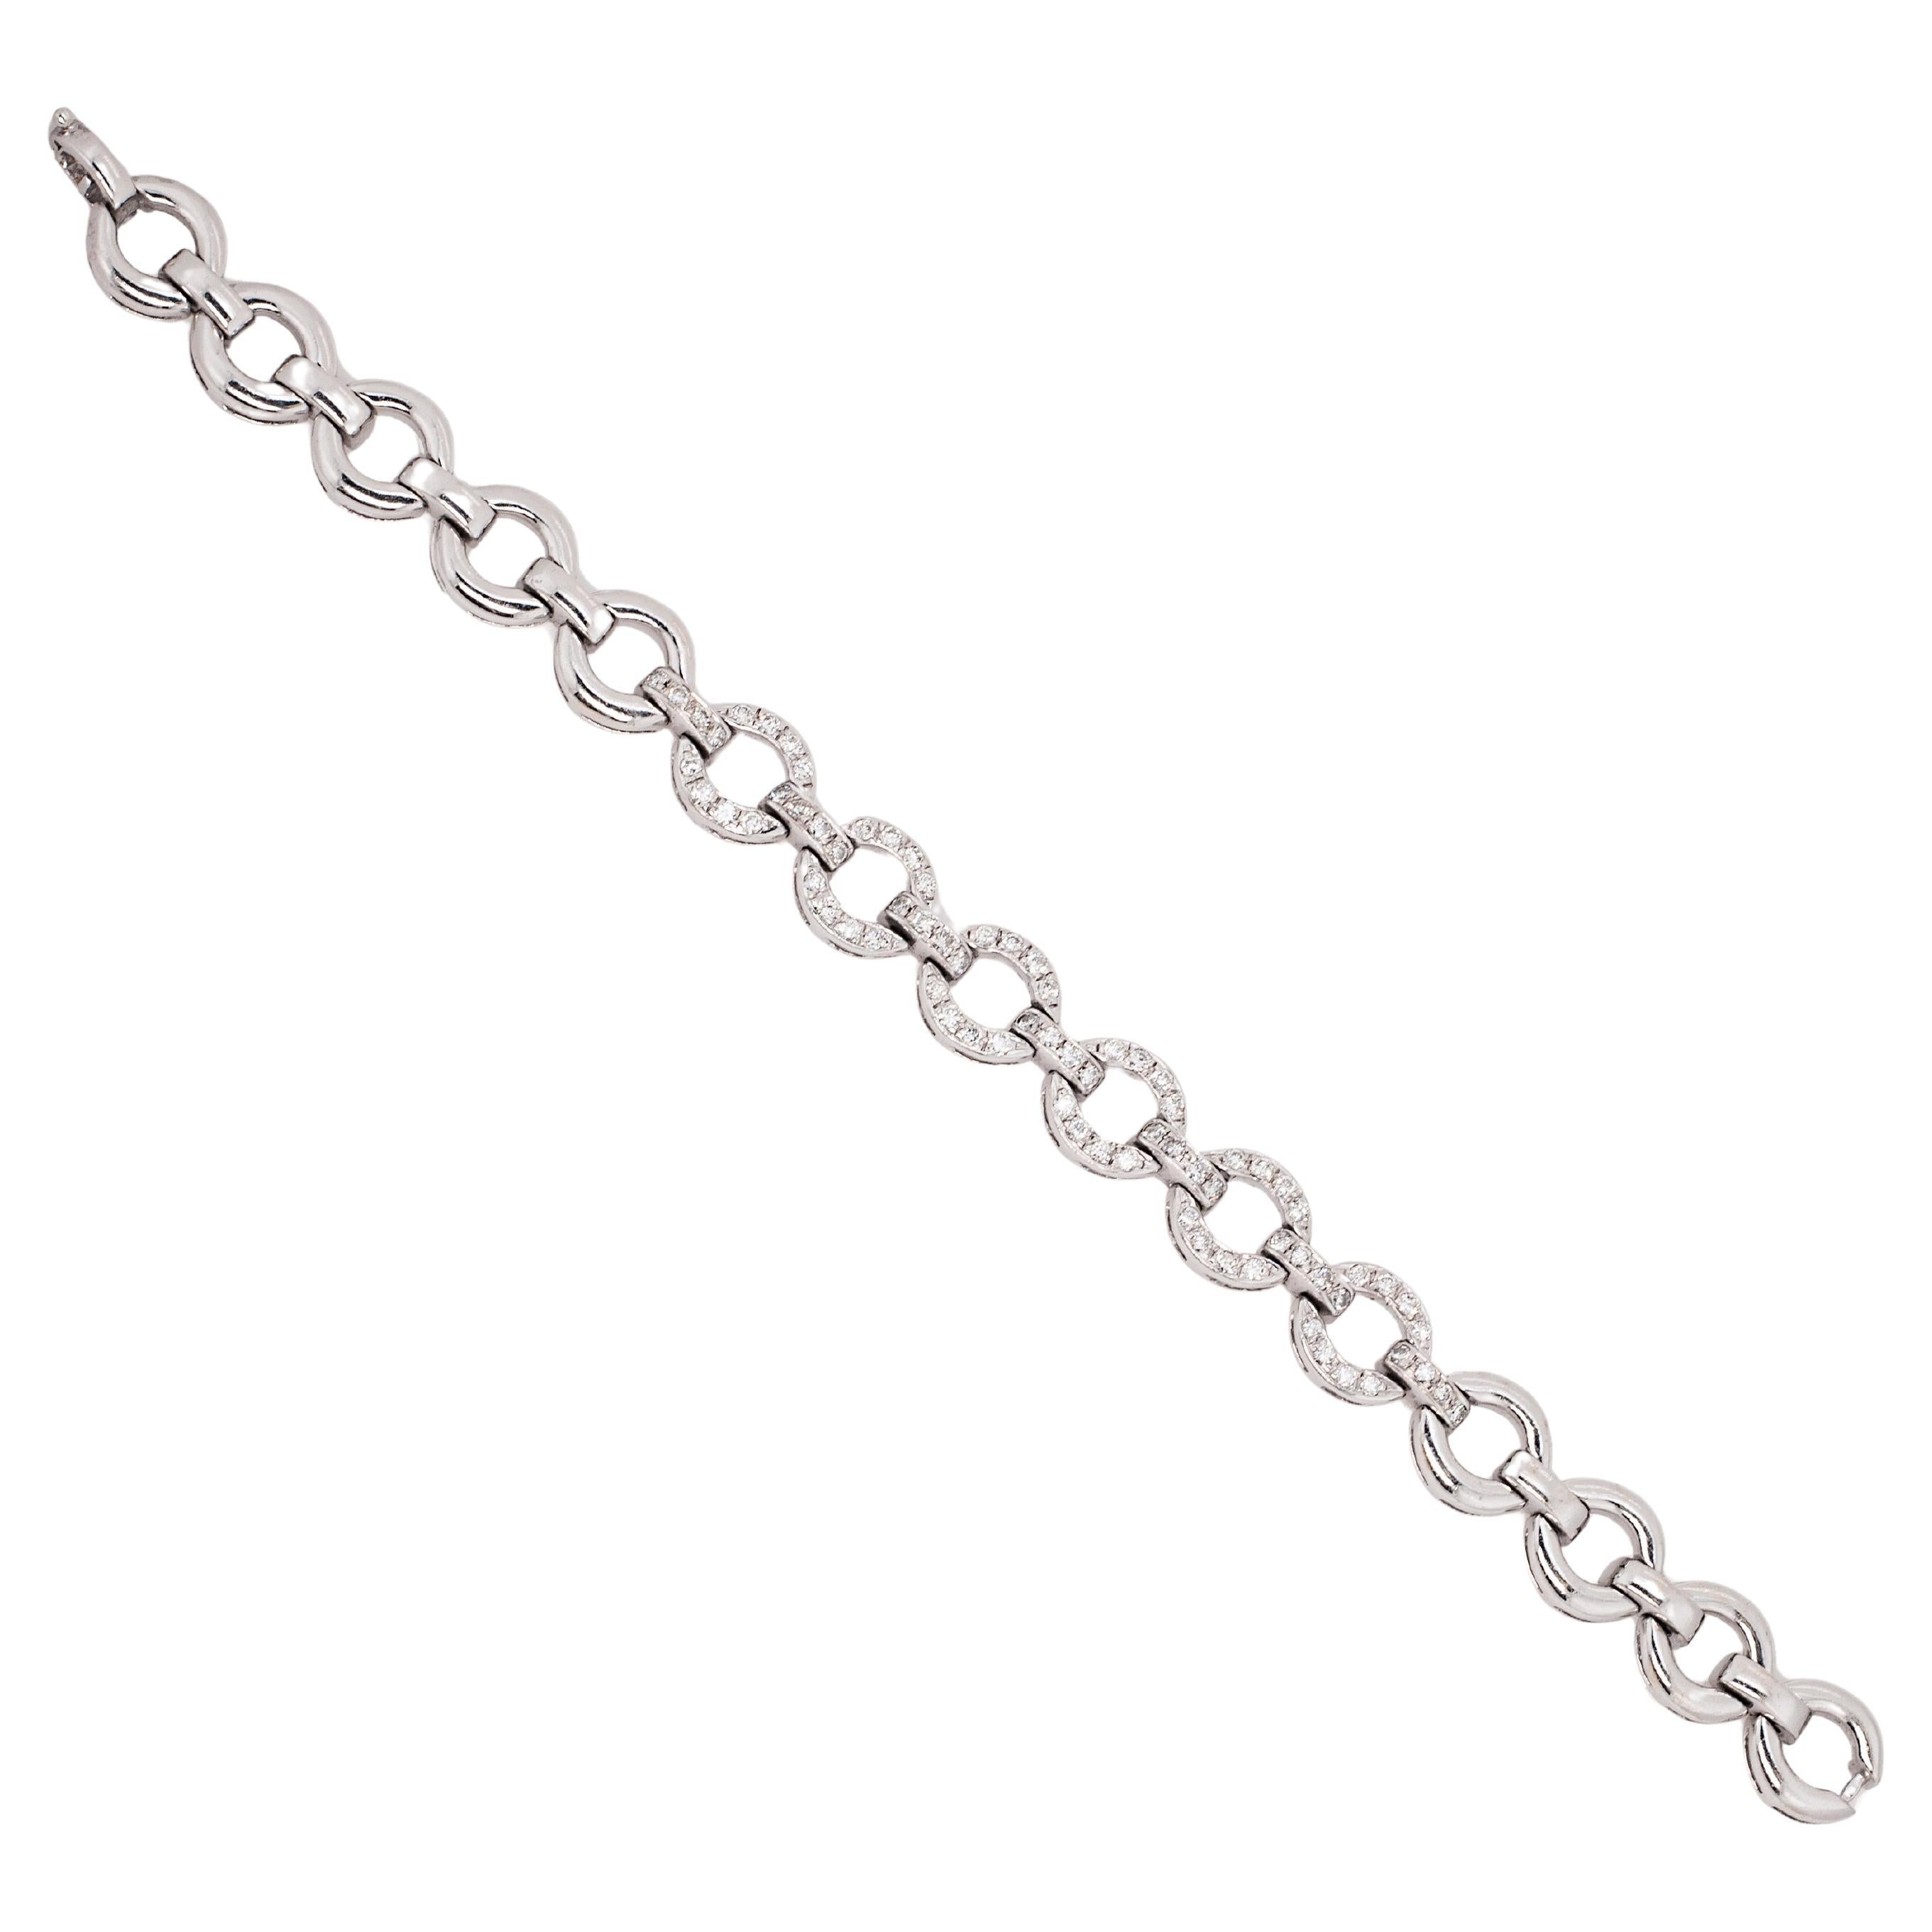 Exuding a special finesse through its expertly crafted details, this 18 carat white gold bracelet is designed as an articulated series of high-polish and diamond set oval shaped links, alternating with bar links. The central links are beautifully